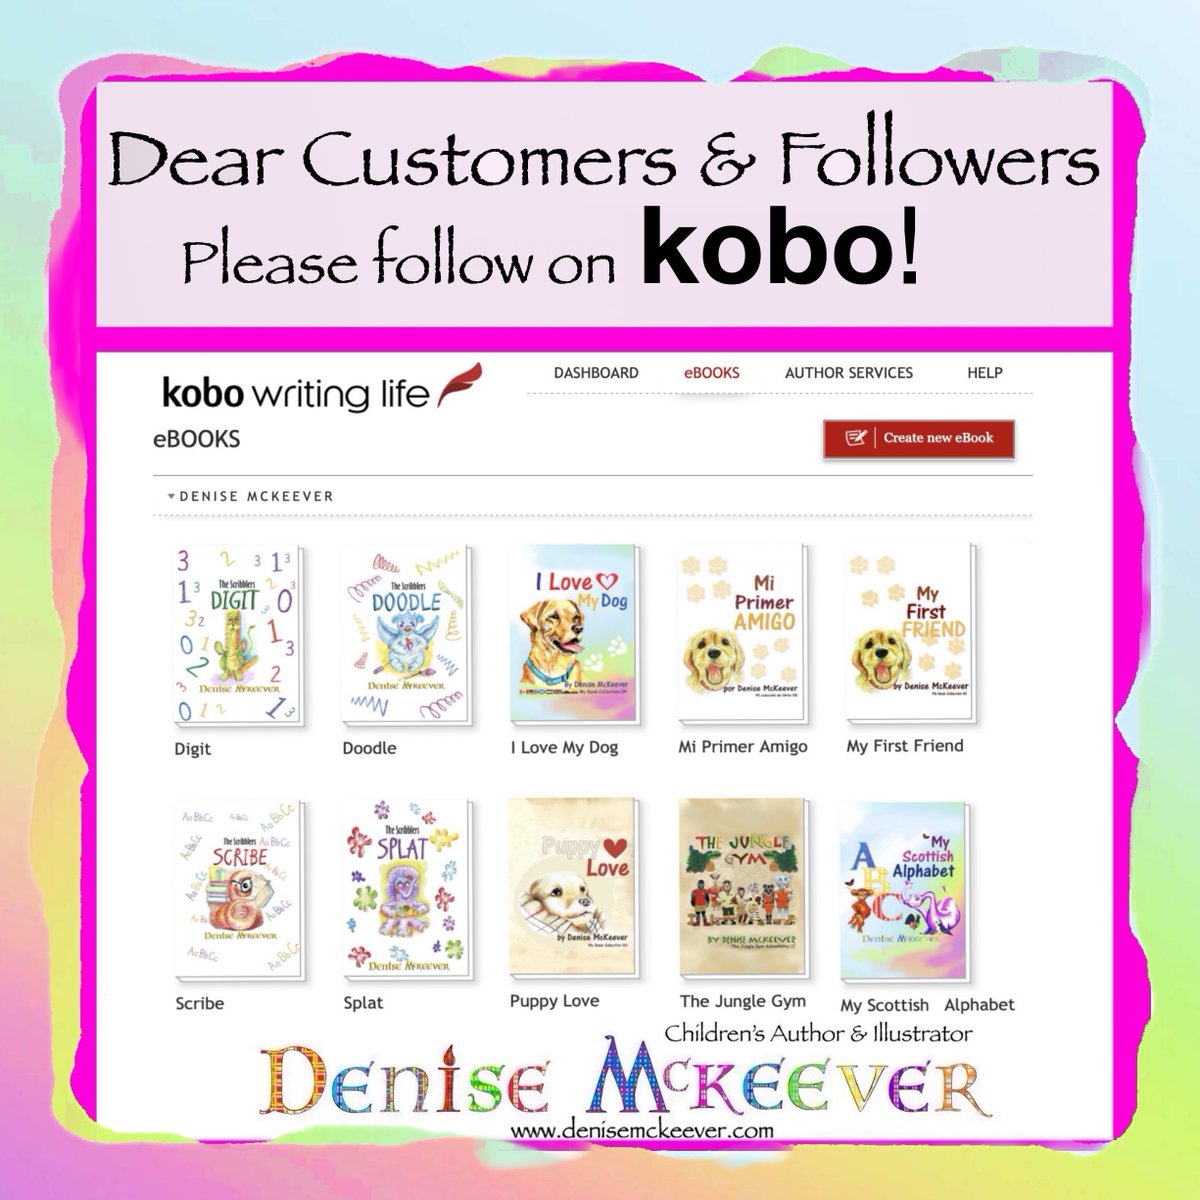 Come and join us on Kobo! @KoboWritingLife
#WriteMore #KWL #selfpub #writing #writer #writingtipshttps://www.kobo.com/gb/en/search?query=denise+mckeever&ac=1&acp=denise+mckeever&ac.author=denise+mckeever&sort=Temperature&fclanguages=en #books #newebooks #ebooks